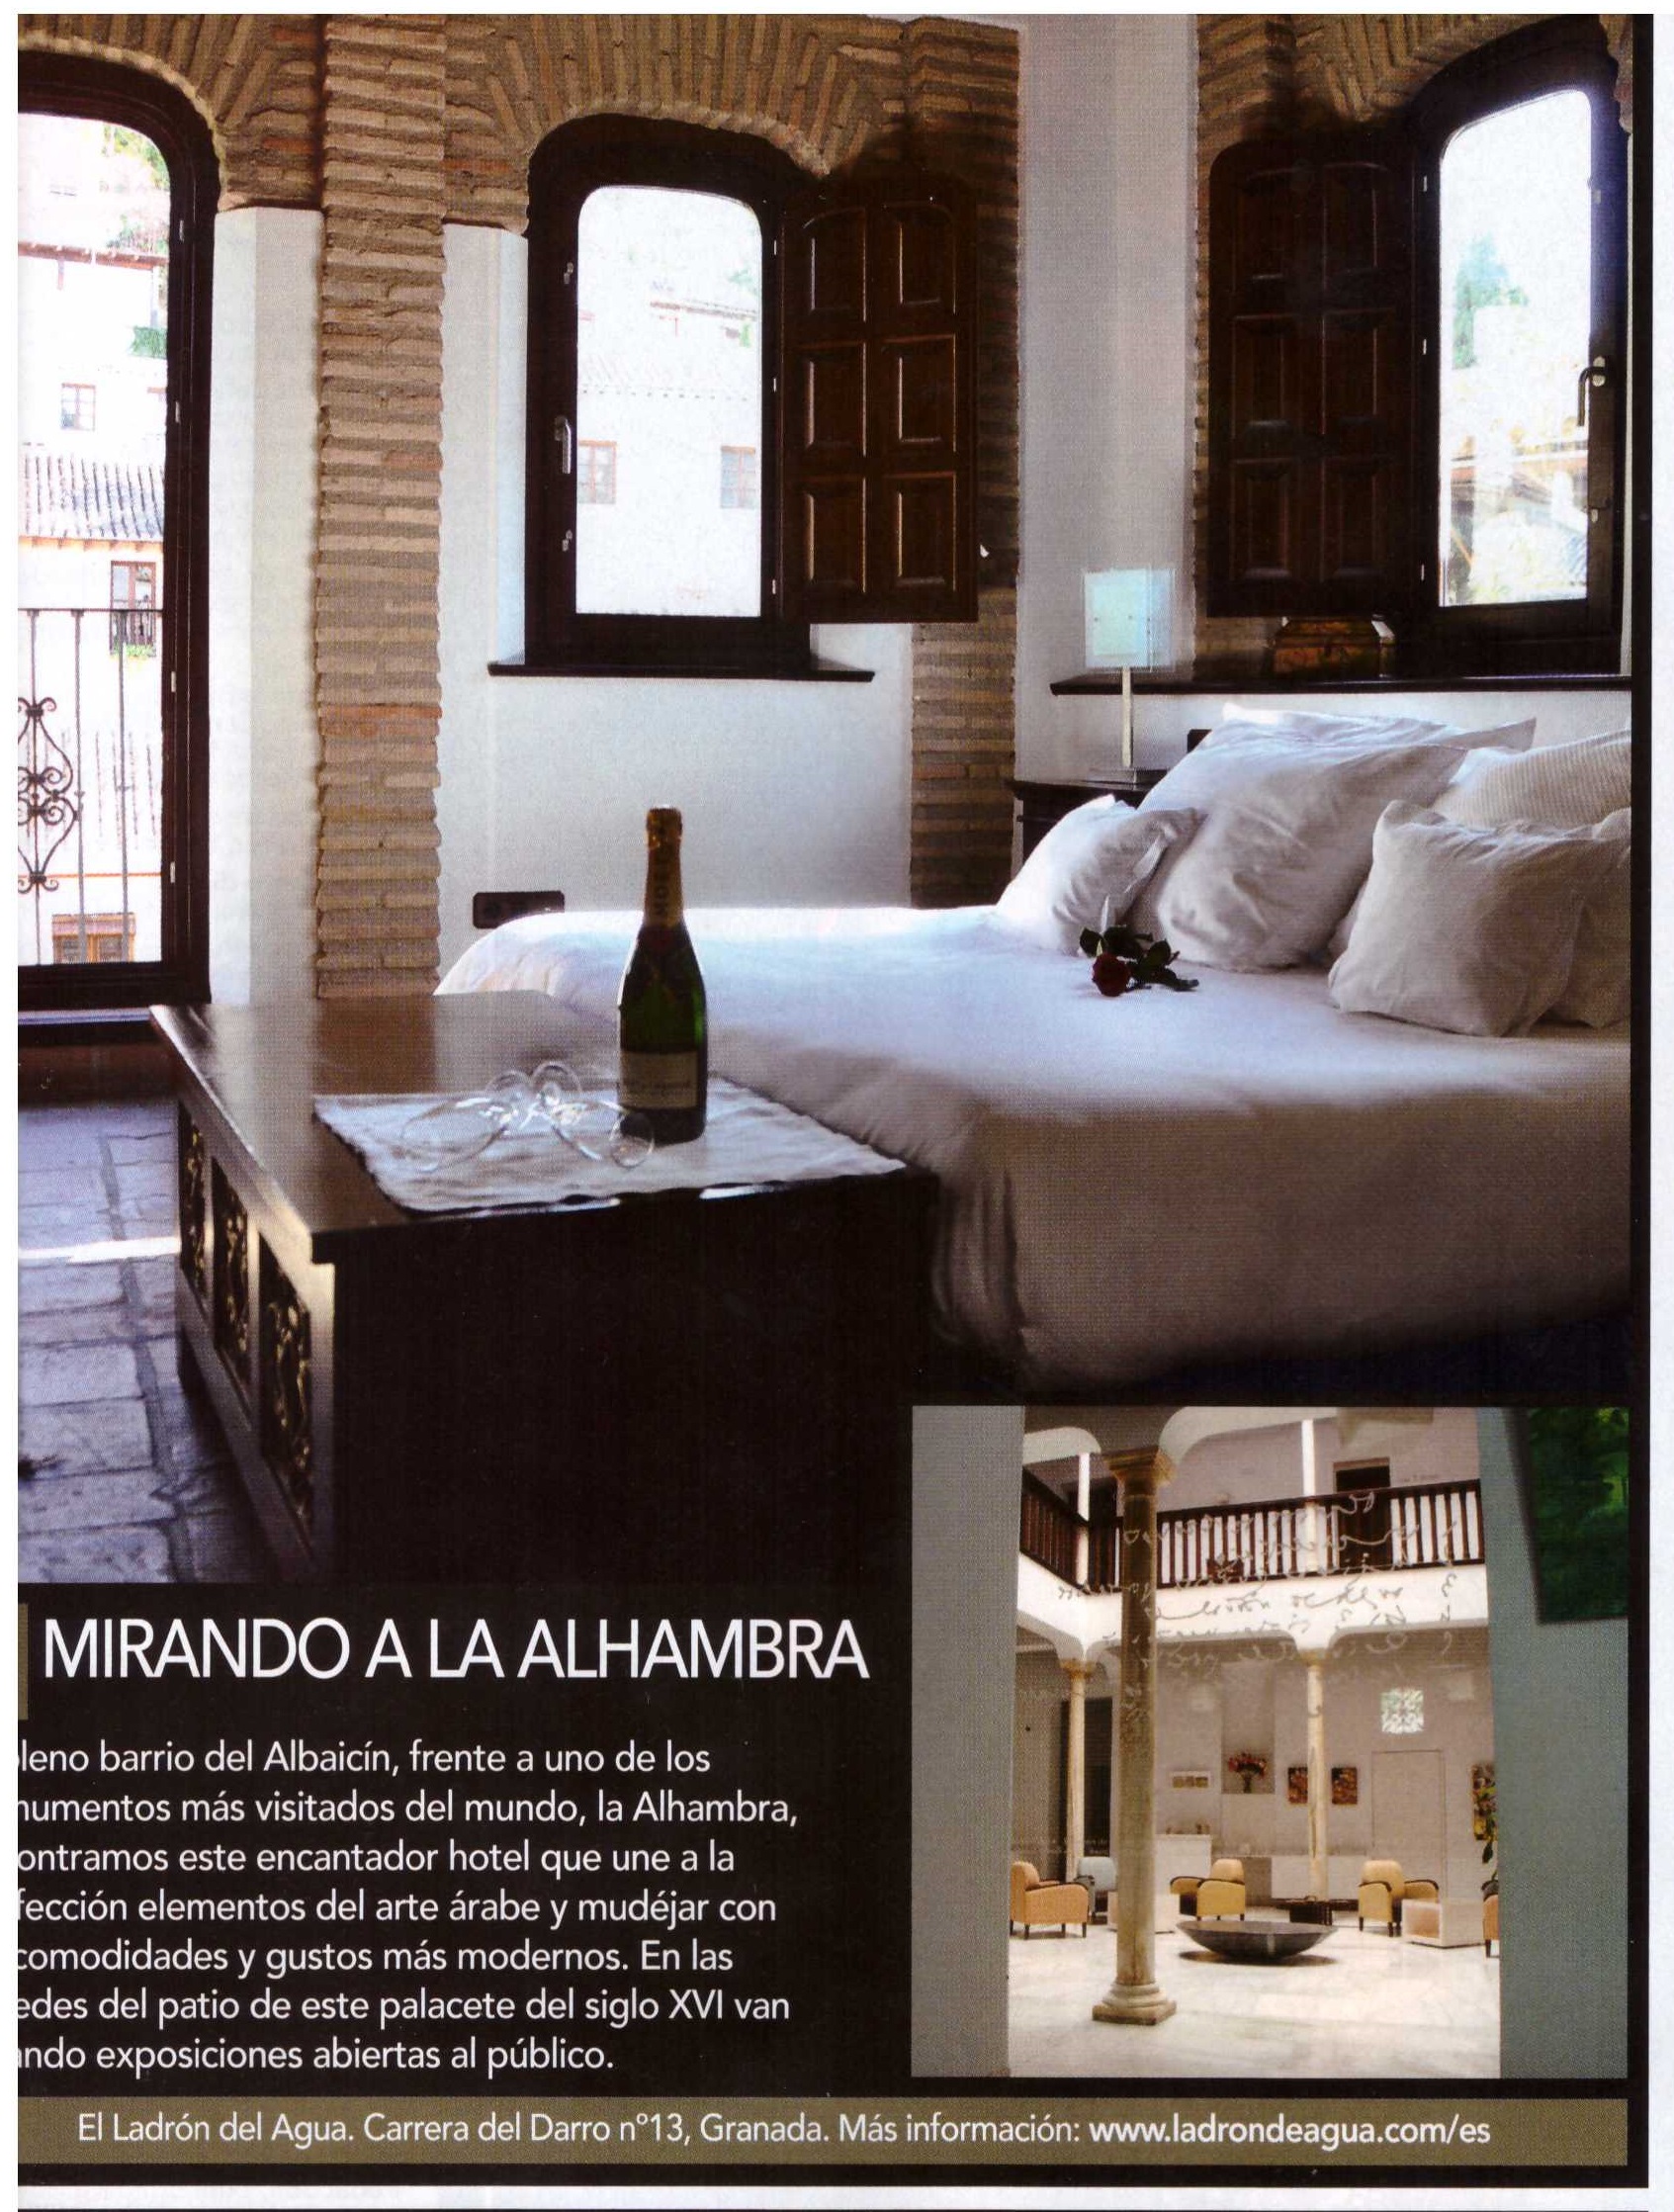 Appearance in “Revista Love”